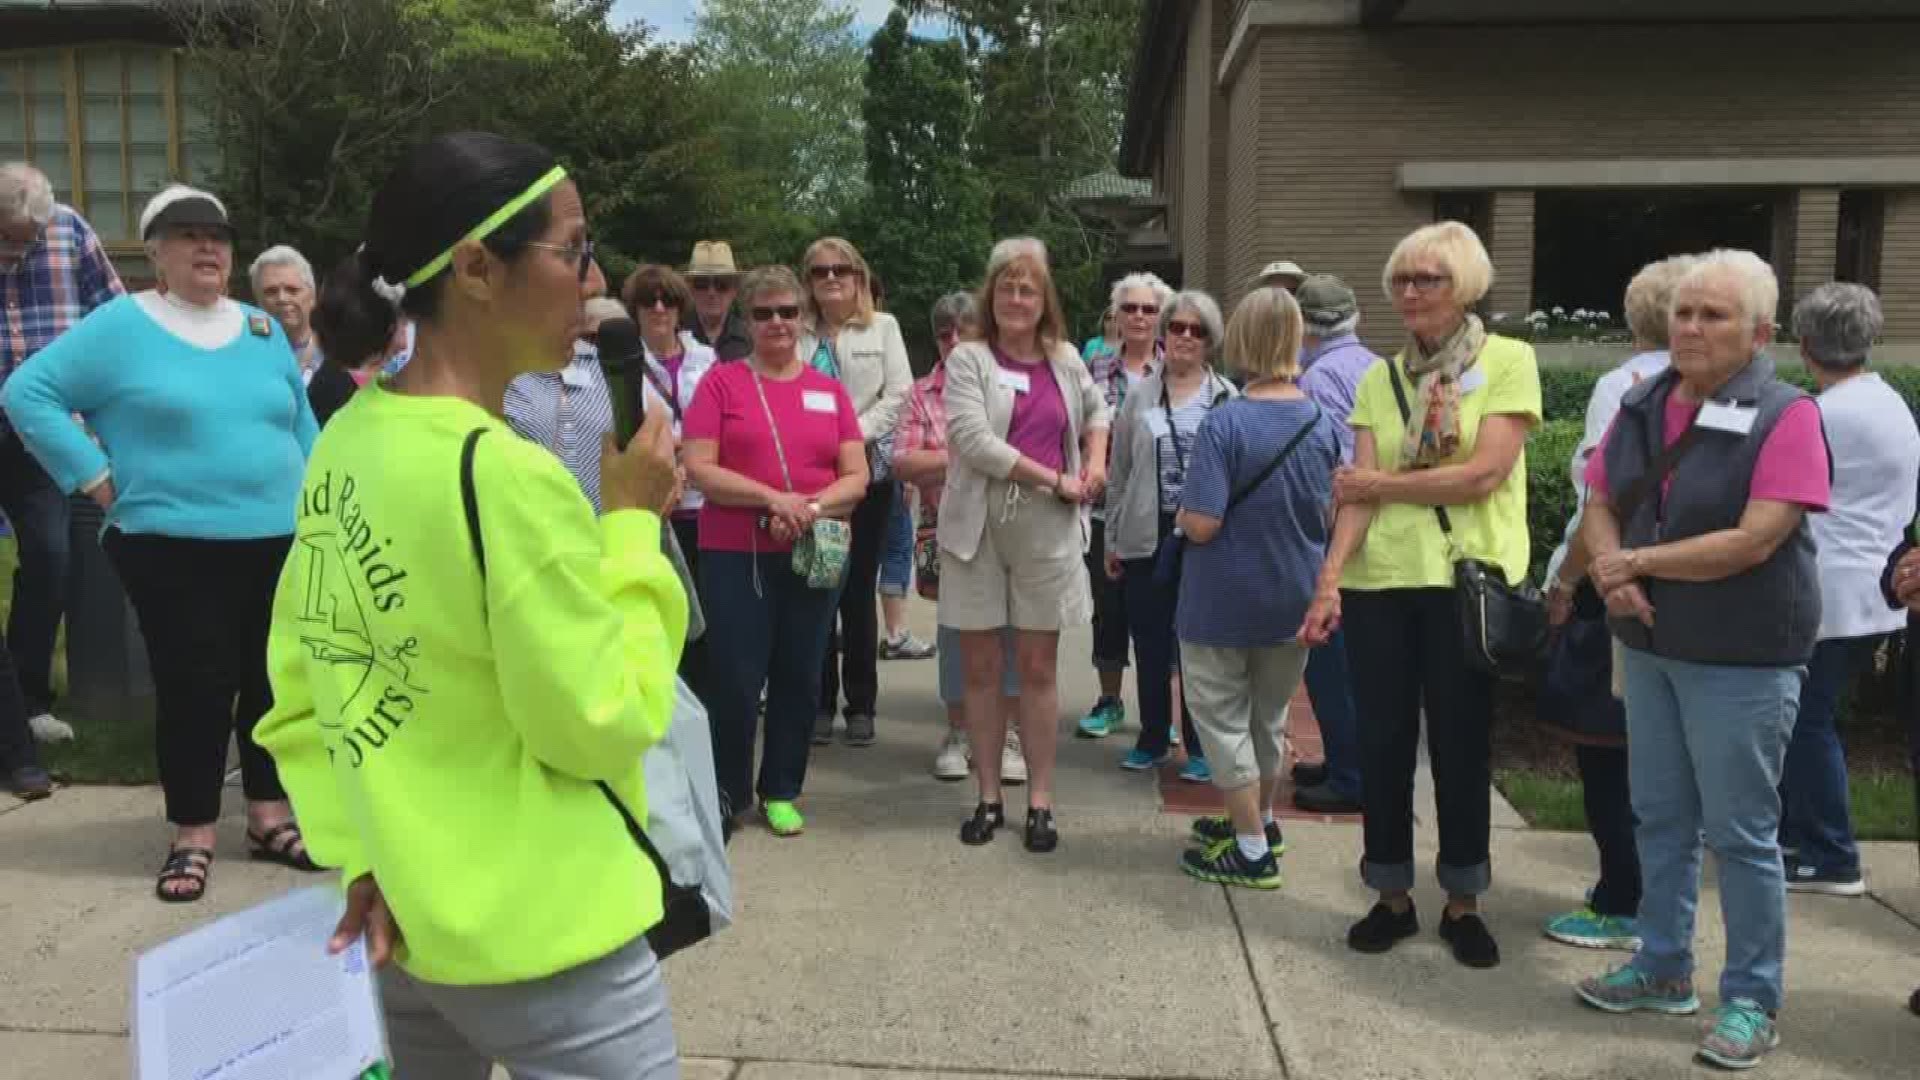 Grand Rapids Running Tours started about three years ago when founder, Caroline Cook, thought it would be a great way to familiarize yourself with the city.